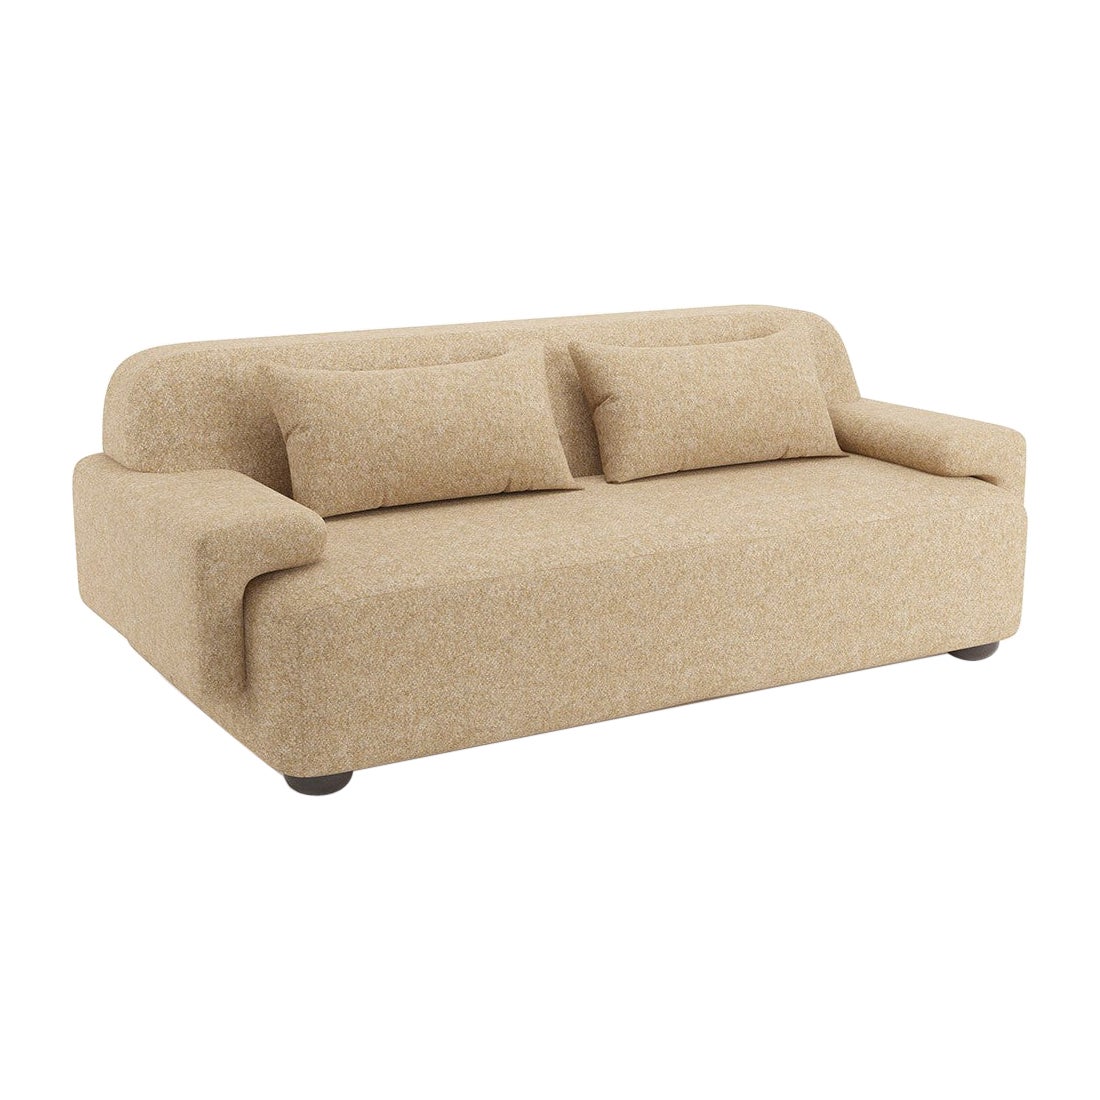 Popus Editions Lena 2.5 Seater Sofa in Saffron Antwerp Linen Upholstery